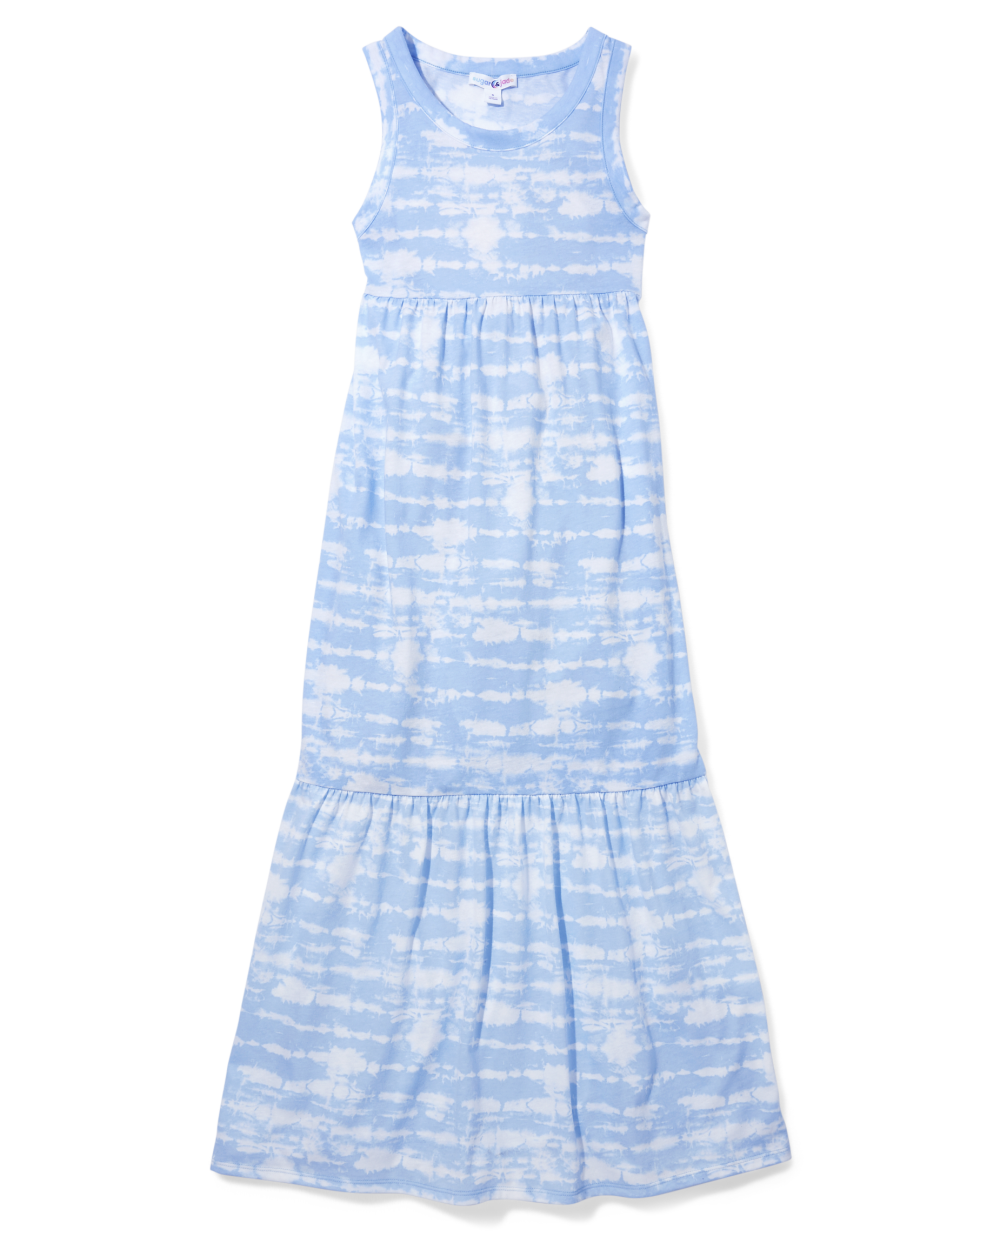 Girls Sleeveless Tank Round Neck Tie Dye Print Ruched Below the Knee Maxi Dress With Ruffles